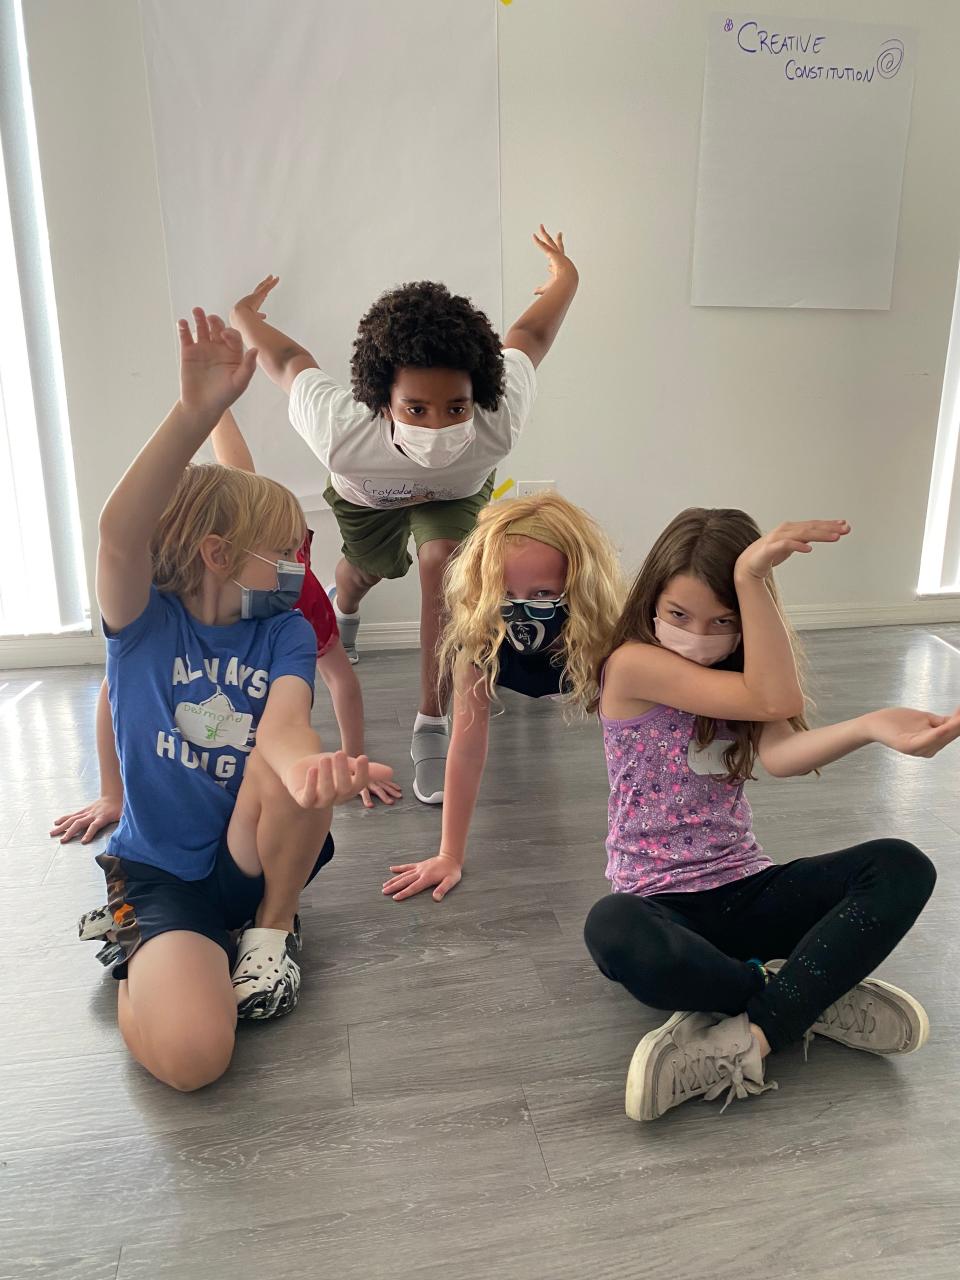 Asolo Repertory Theatre is providing opportunites for parents of young children to attend performances with its PlayDate series, which provides theater activities for the kids during certain matinees.